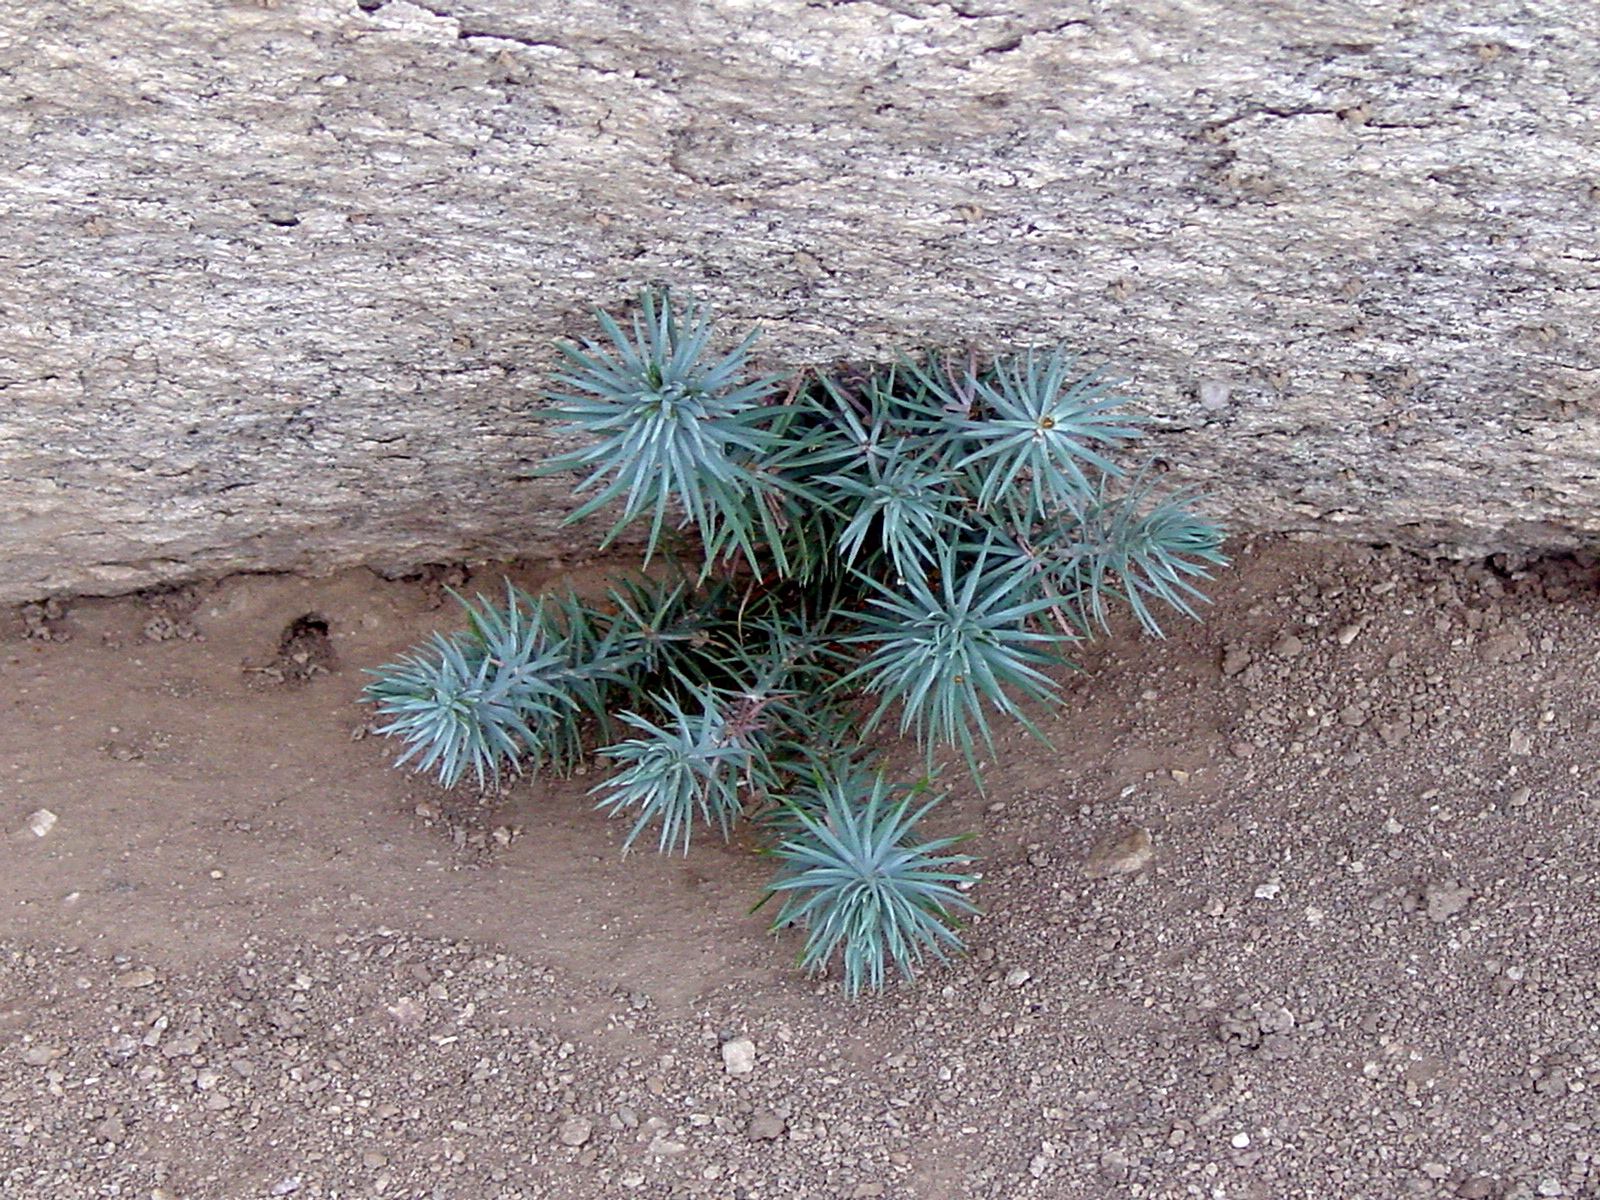 Small pine seedling growing at the base of a rock.